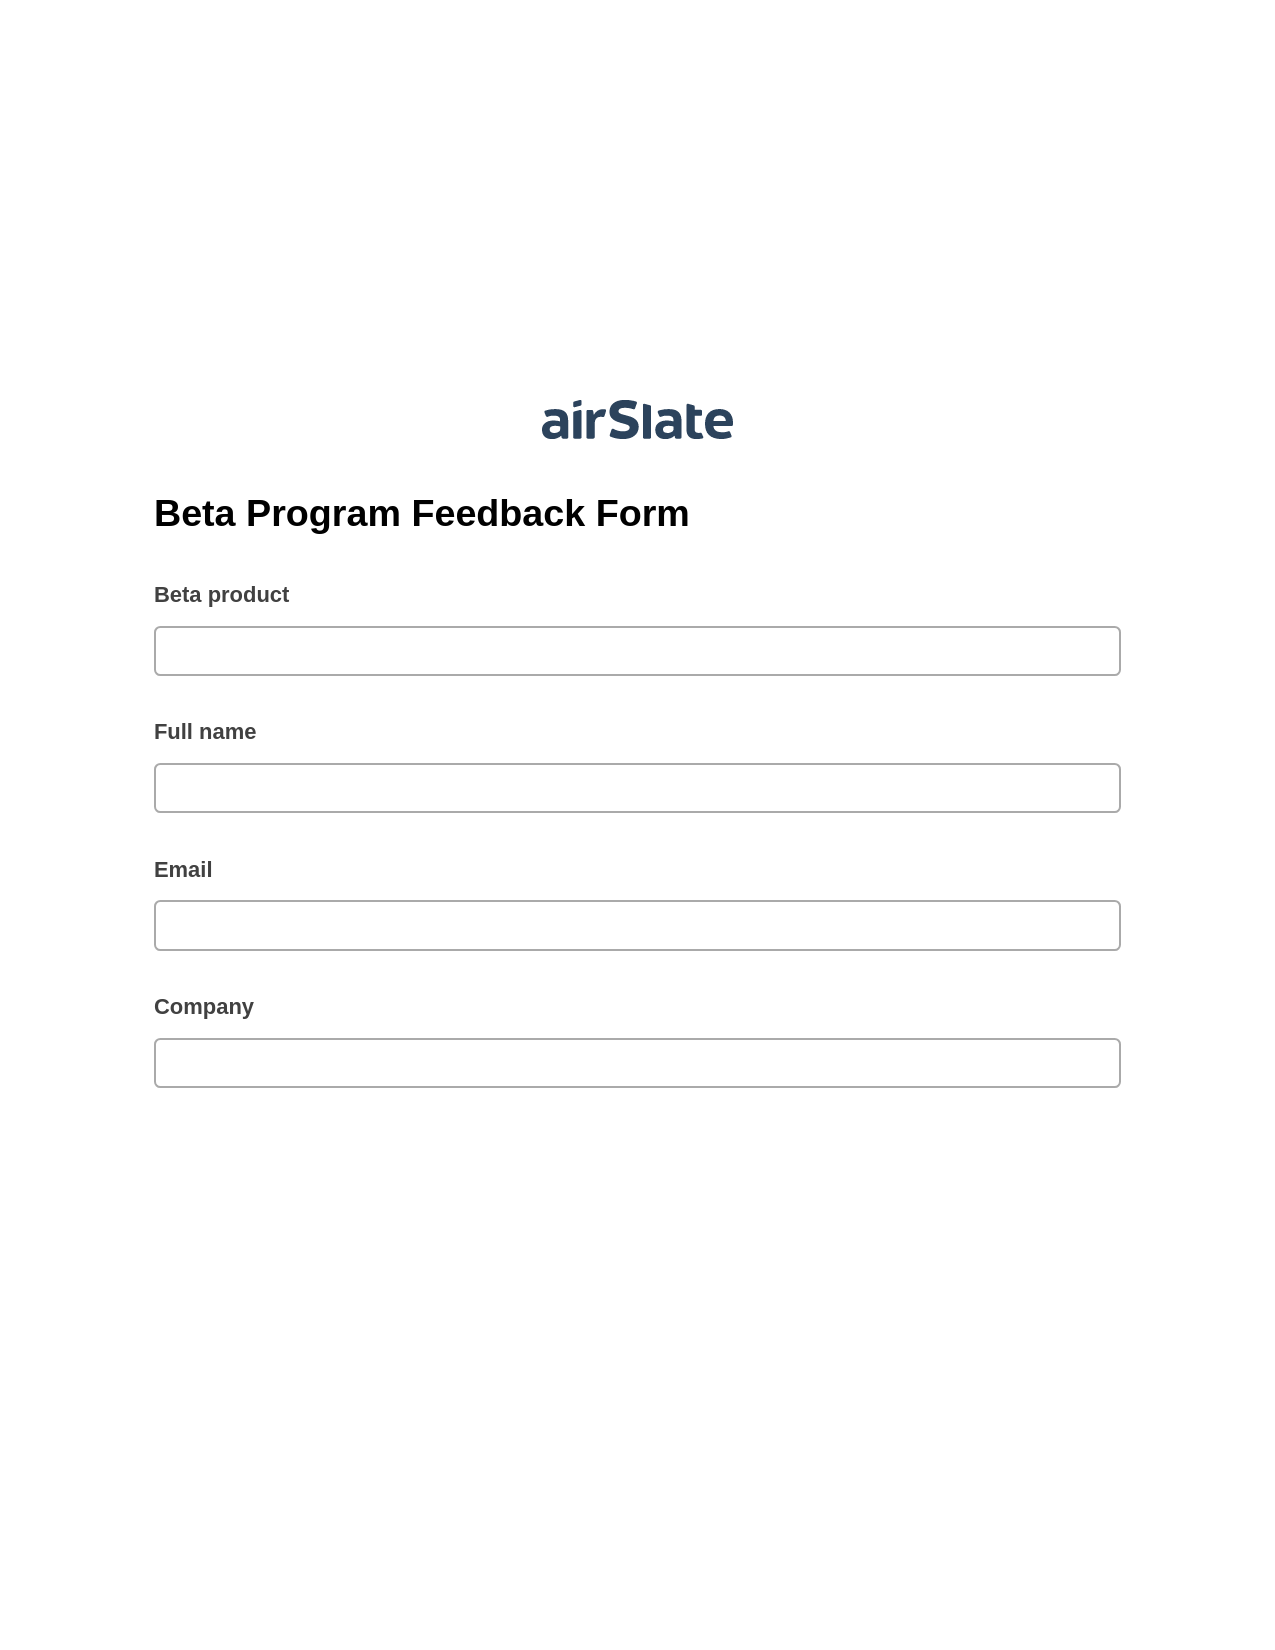 Multirole Beta Program Feedback Form Pre-fill from CSV File Bot, Remove Tags From Slate Bot, Dropbox Bot